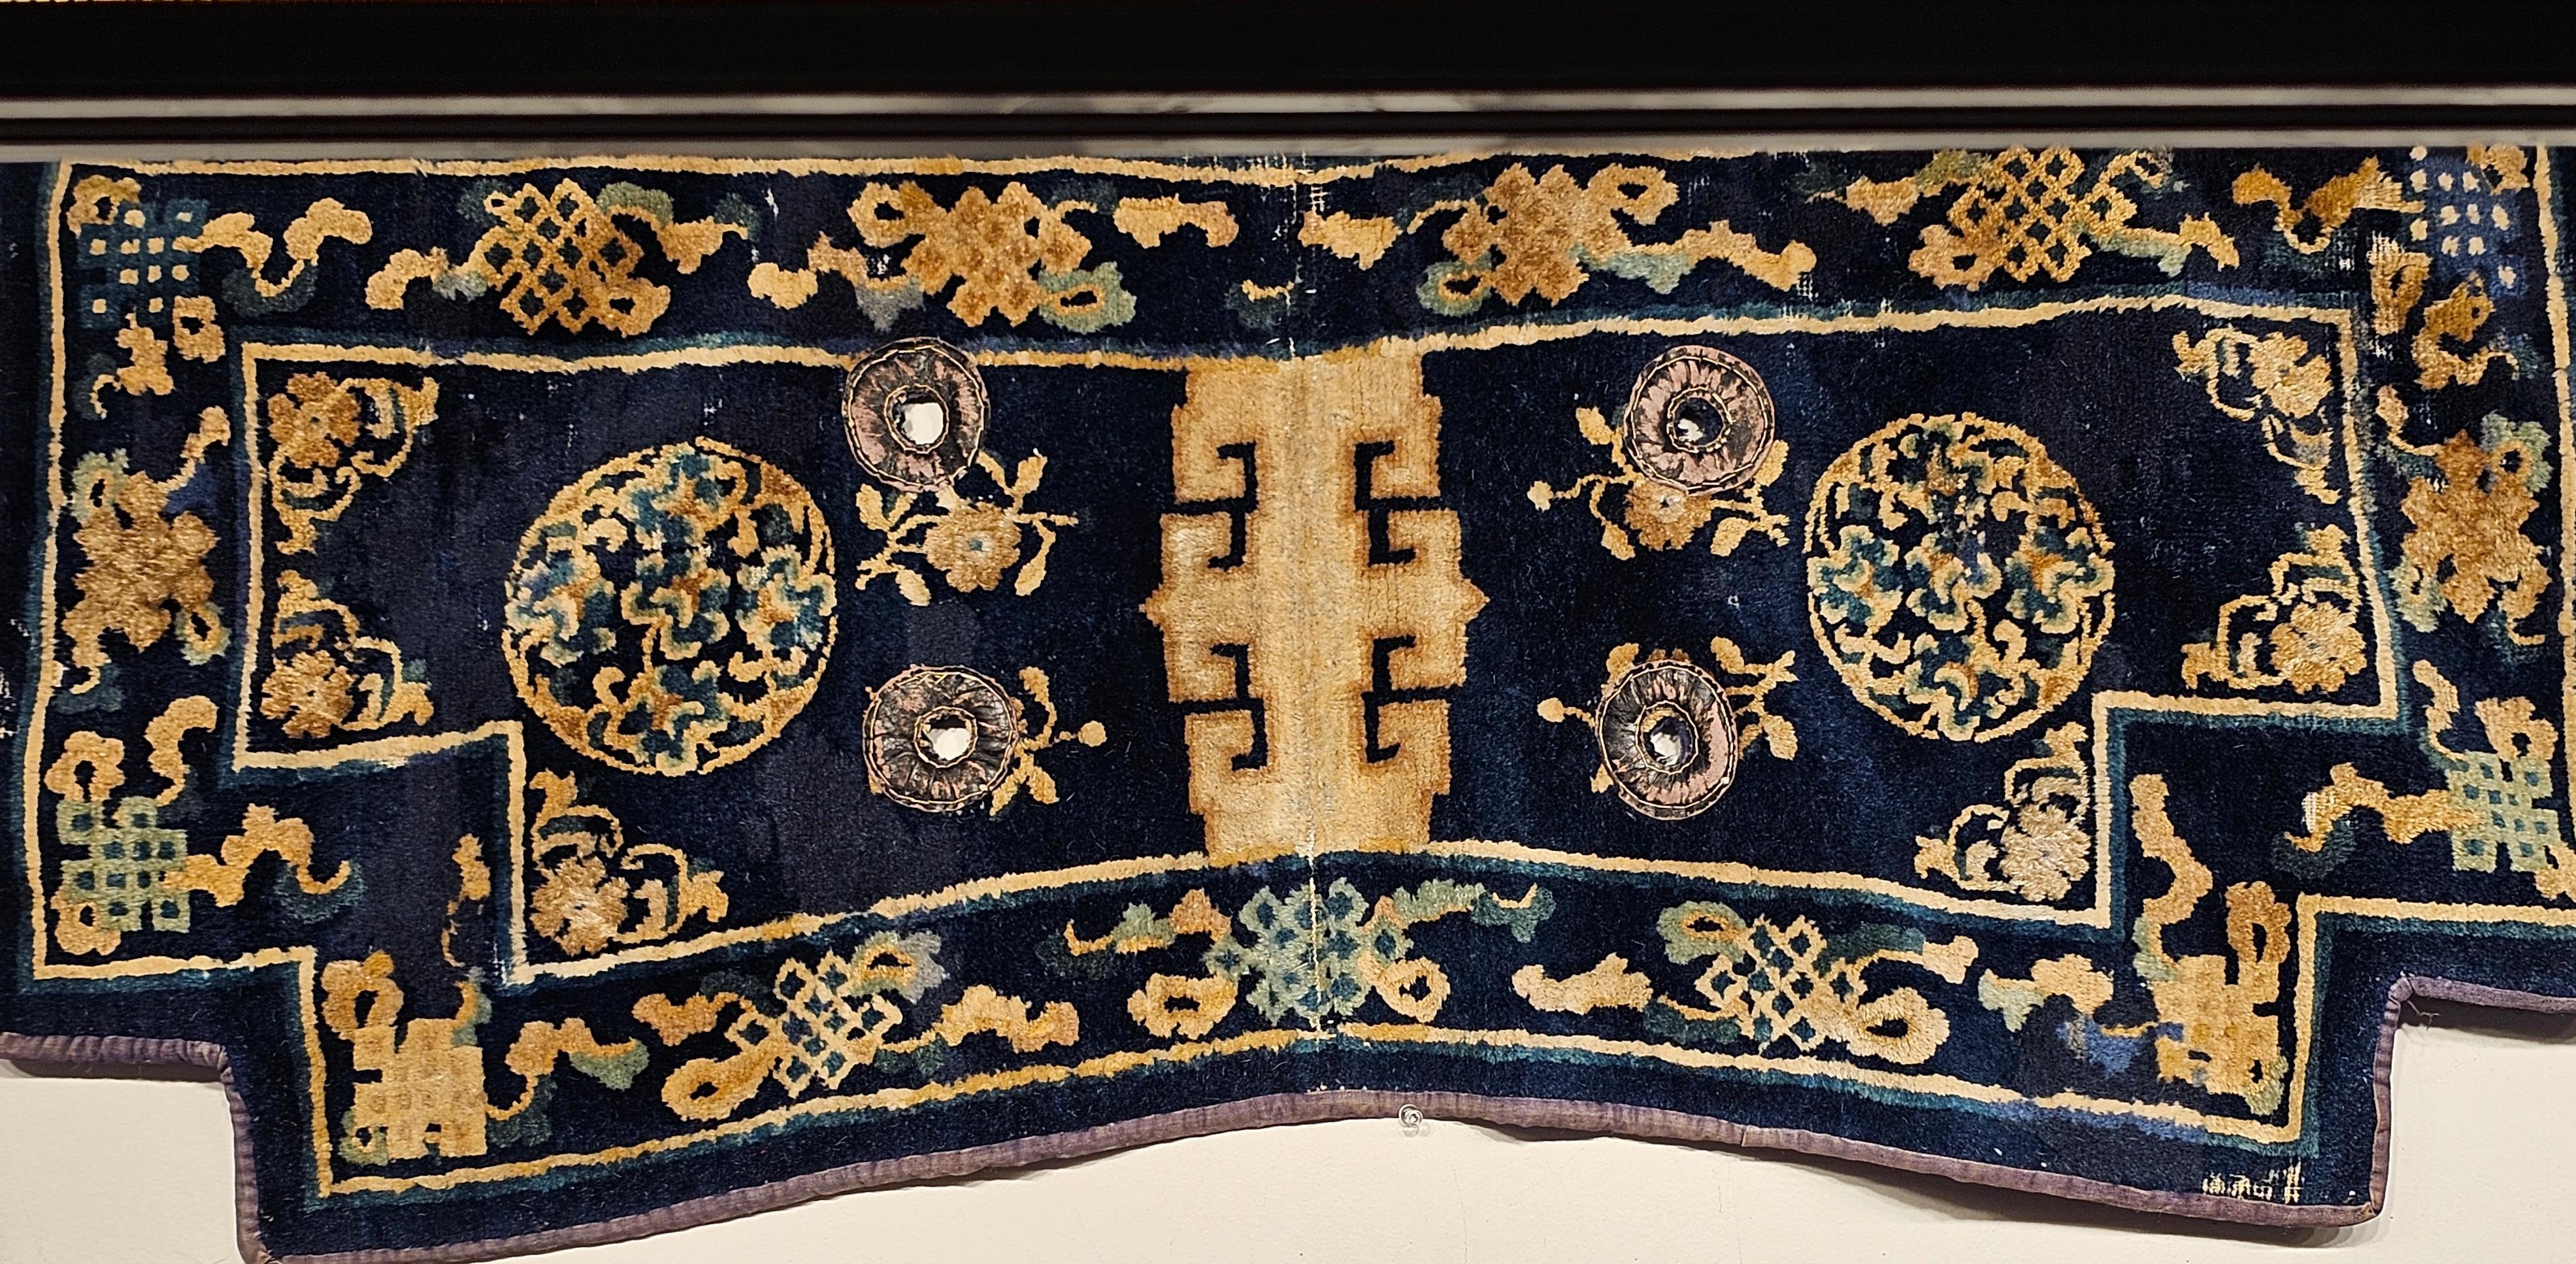 Hand-Knotted 19th Century Ningxia Saddle Cover with Auspicious Symbol Border in Indigo Blue For Sale